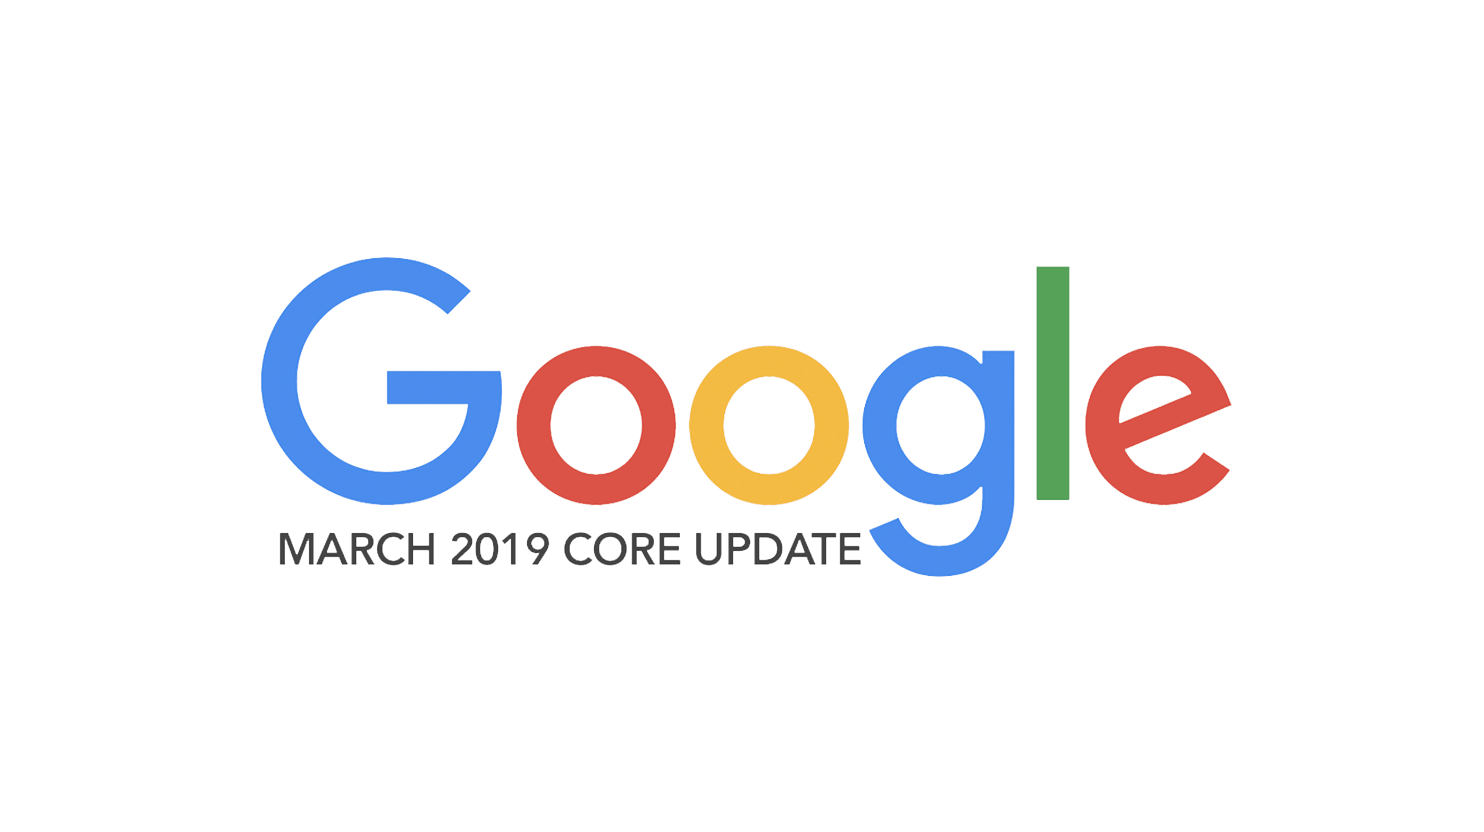 The March Brand Core Update 